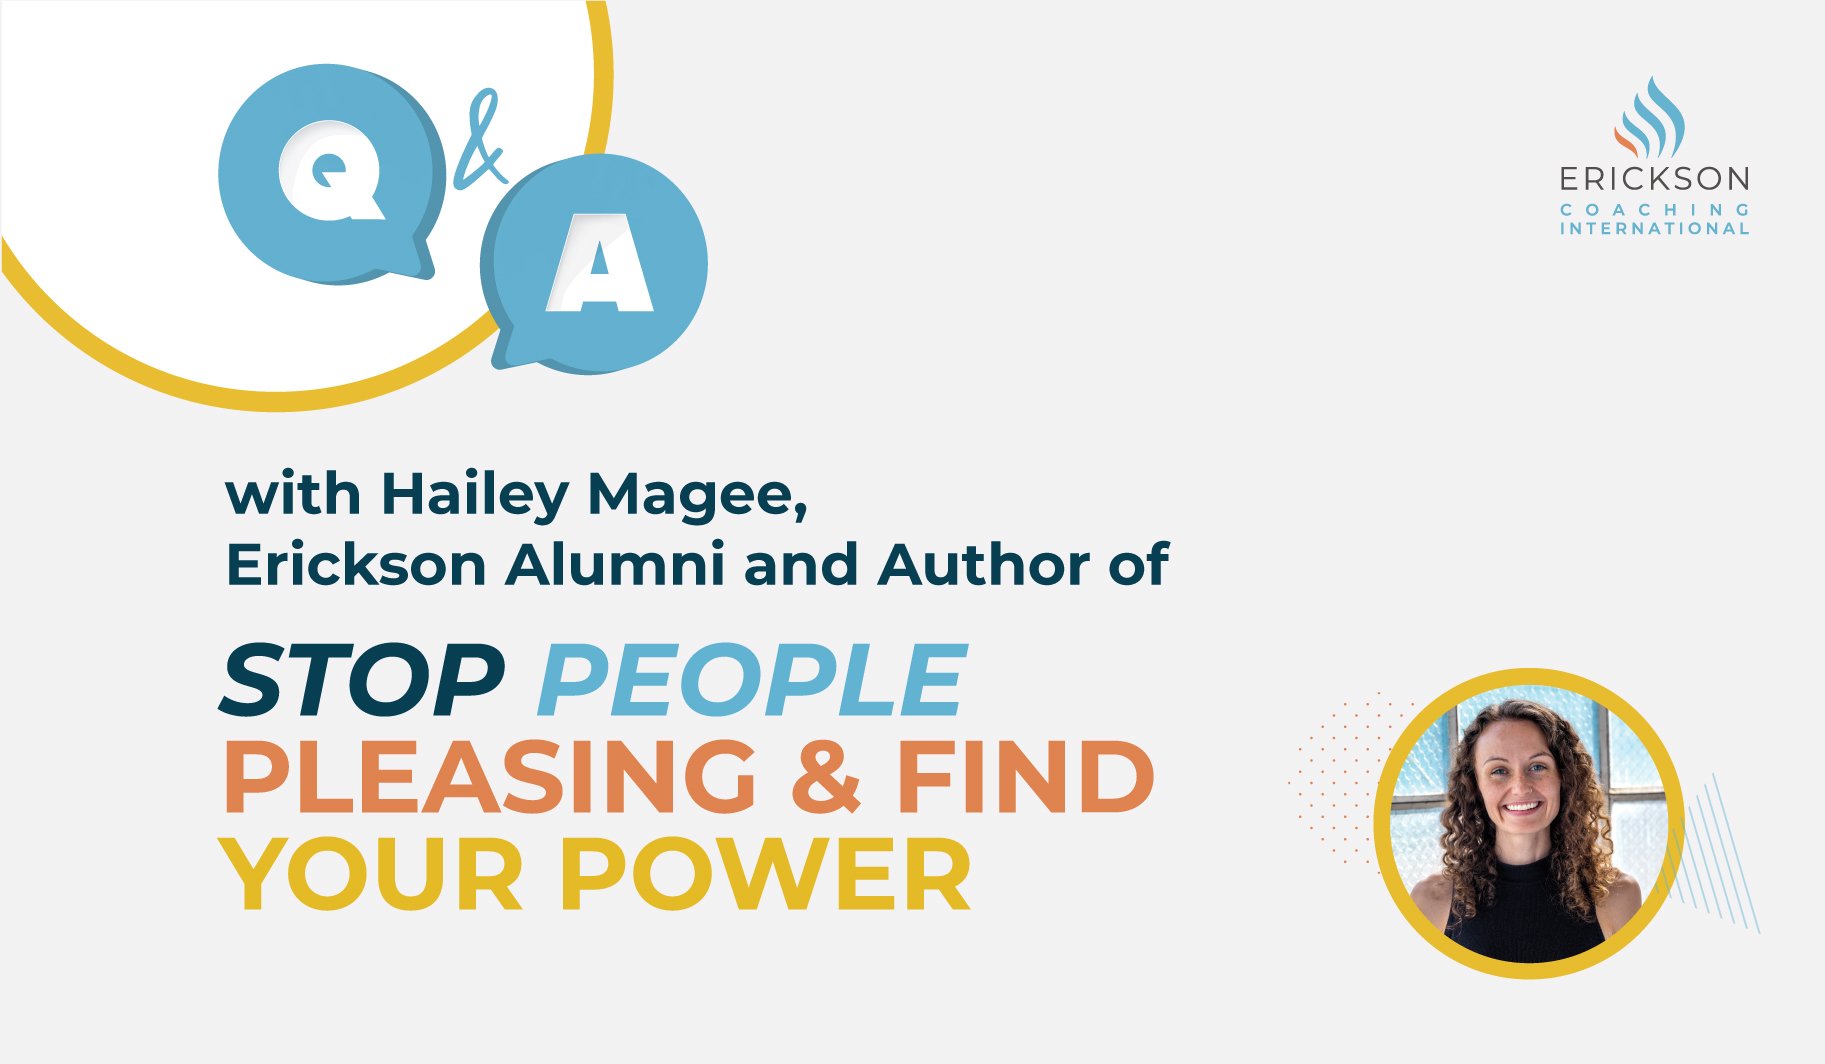 Hailey Magee, Erickson Alumni and Author of ‘Stop People Pleasing and Find Your Power’